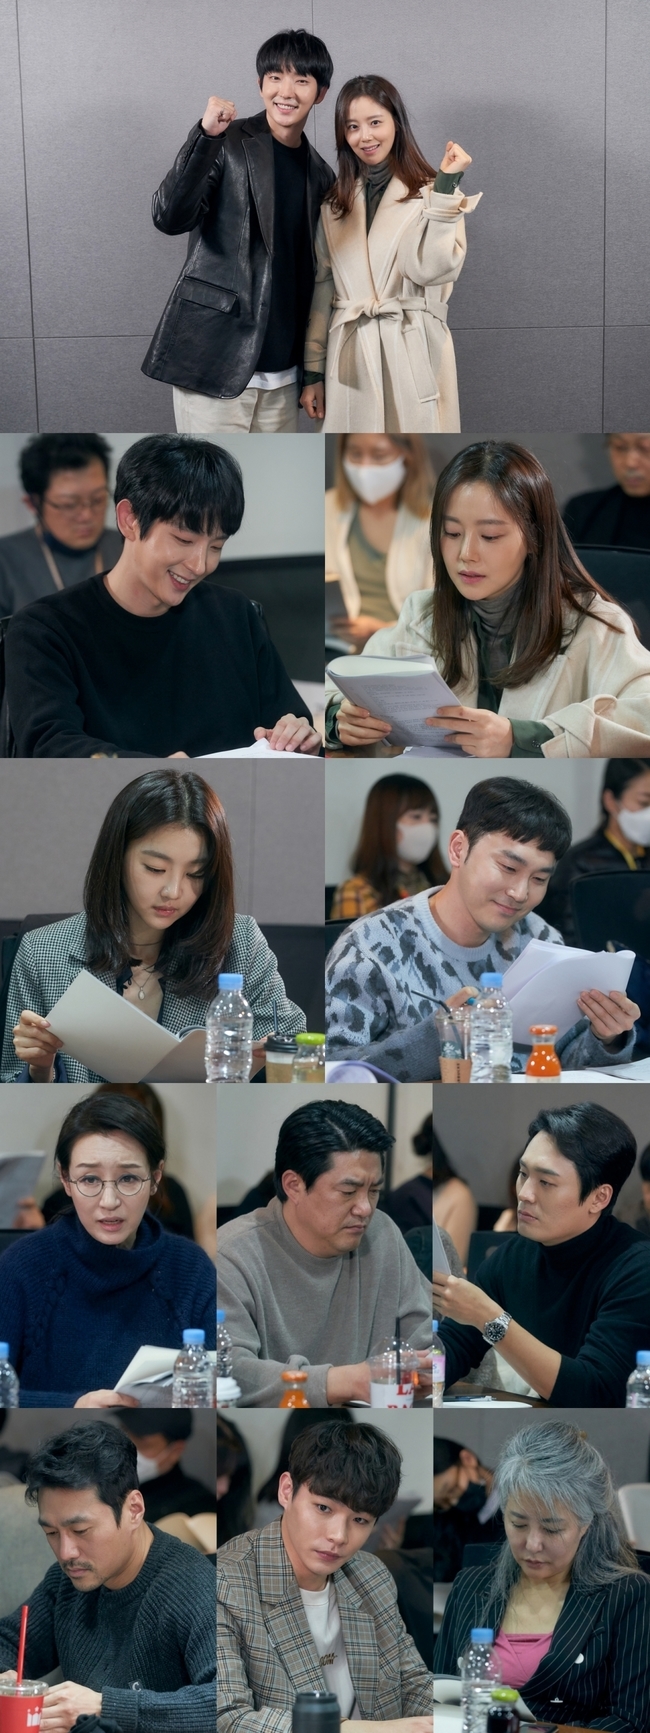 The Flower of Evil was unveiled at the Transcript Reading scene in Lee Joon-gi and Moon Chae-won.TVNs new drama, The Flower of Evil (directed by Kim Cheol-gyu/playplayplay by Yoo Jung-hee/production studio dragon, Monster Union), which throws a shocking topic, What if my husband who has loved me for 14 years is a serial killer without blood or tears?, is a man who hid a brutal past and changed his identity, and a violent wife who tracks his past. It is a high-density emotional tracing of two people who stand in front of the truth that they want to ignore (Moon Chae-won).In the Transcript Reading scene, which announced the start of the full-scale voyage, director Kim Chul-gyu of the luxury production between melodrama and thriller, writer Yoo Jung-hee, who is attracting attention with his solid writing power, Lee Joon-gi (Baek Hee-sung station), Moon Chae-won (Cha Ji-won station), Jang Hee-jin (Do Hae-su station), Seo Hyun-woo (Kim Moo-jin station) Actors, who believed in the main axis, were all in the same mood.Lee Joon-gi said, I want to leave it as a work that will be remembered for a long time for viewers. Moon Chae-won also expressed his enthusiasm that he would do Do best to show good acting as he met good works.Actors, who exchanged greetings in a cheerful atmosphere, began to bloom properly with the opening of the evil flower, performing a hot performance that filled the dialogue and emotions that each person was immersed in the role and exchanged like Ping Pong.Lee Joon-gi, who was divided into Baek Hee-sung, a man who hid the past like a time bomb in the play, and even loved it, completed the breathtaking tightrope of the extreme, and Moon Chae-won showed a different act of acting with the double charm of his loving wife and charismatic powerful Detective.Above all, if the two melodramatic couple Chemie made the scene hot, the delicate Acting, which is suspicious of each other, filled the scene with breathtaking tension.In this way, Actors, who are not too much of a luxury actor, such as Kim Ji-hoon, Choi Byung-mo, Son Jong-hak, Nam Ki-ae and Yoon Byung-hee, who have a changing spectrum of Acting, will join together to increase their immersion.It is said that the production teams ambitious aspiration to make it impossible to let go of the tension as the additional impact figures continue to appear until the middle and late.In addition, the four-color, four-color, four-color, three-color, four-color, three-color, three-color, three-color, three-color, three-color, three-color, three-color, three-color, three-color, three-color, three-color, three-color, three-color, three-color, three-color, three-color, three-color, three-color, three-color, three-color, three-color, three-color, three-color, three-color, three-color, four-color, four-color, four-color, four-color, three-color, three-color,pear hyo-ju